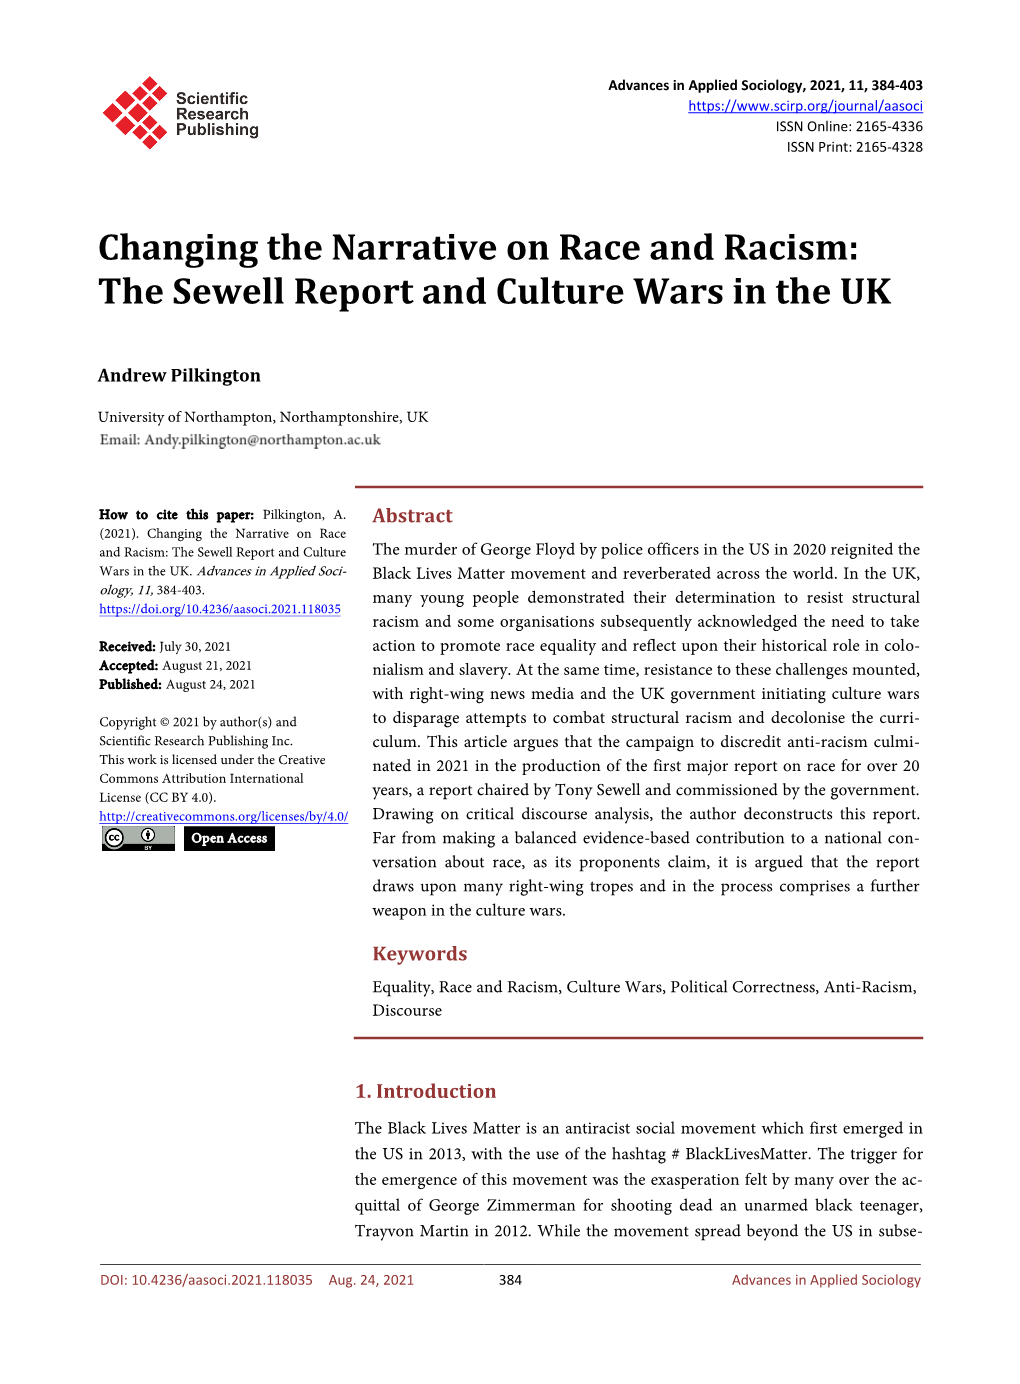 Changing the Narrative on Race and Racism: the Sewell Report and Culture Wars in the UK